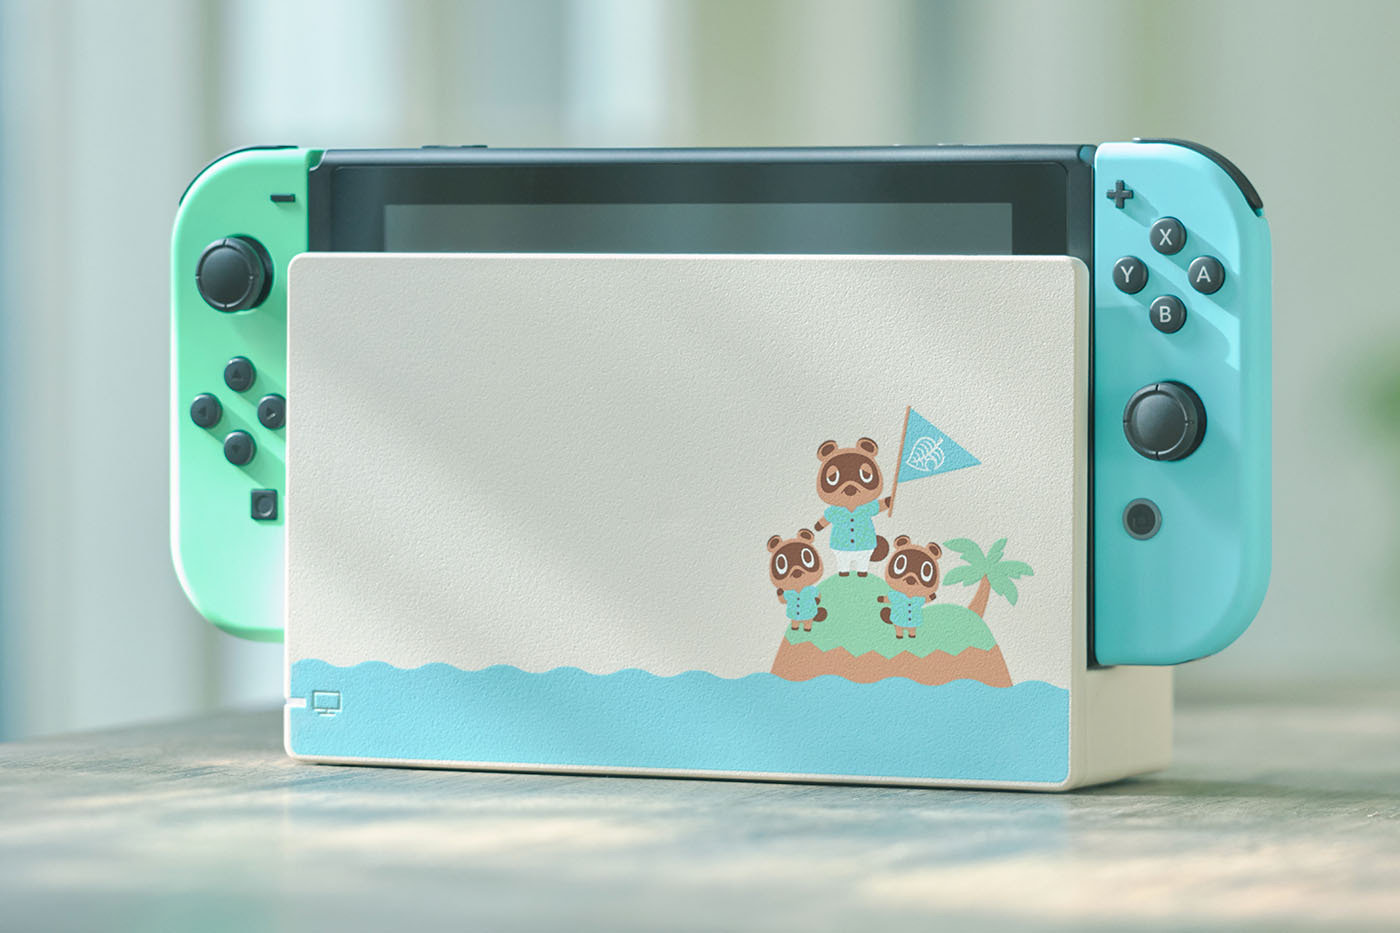 nintendo switch special edition console 2019